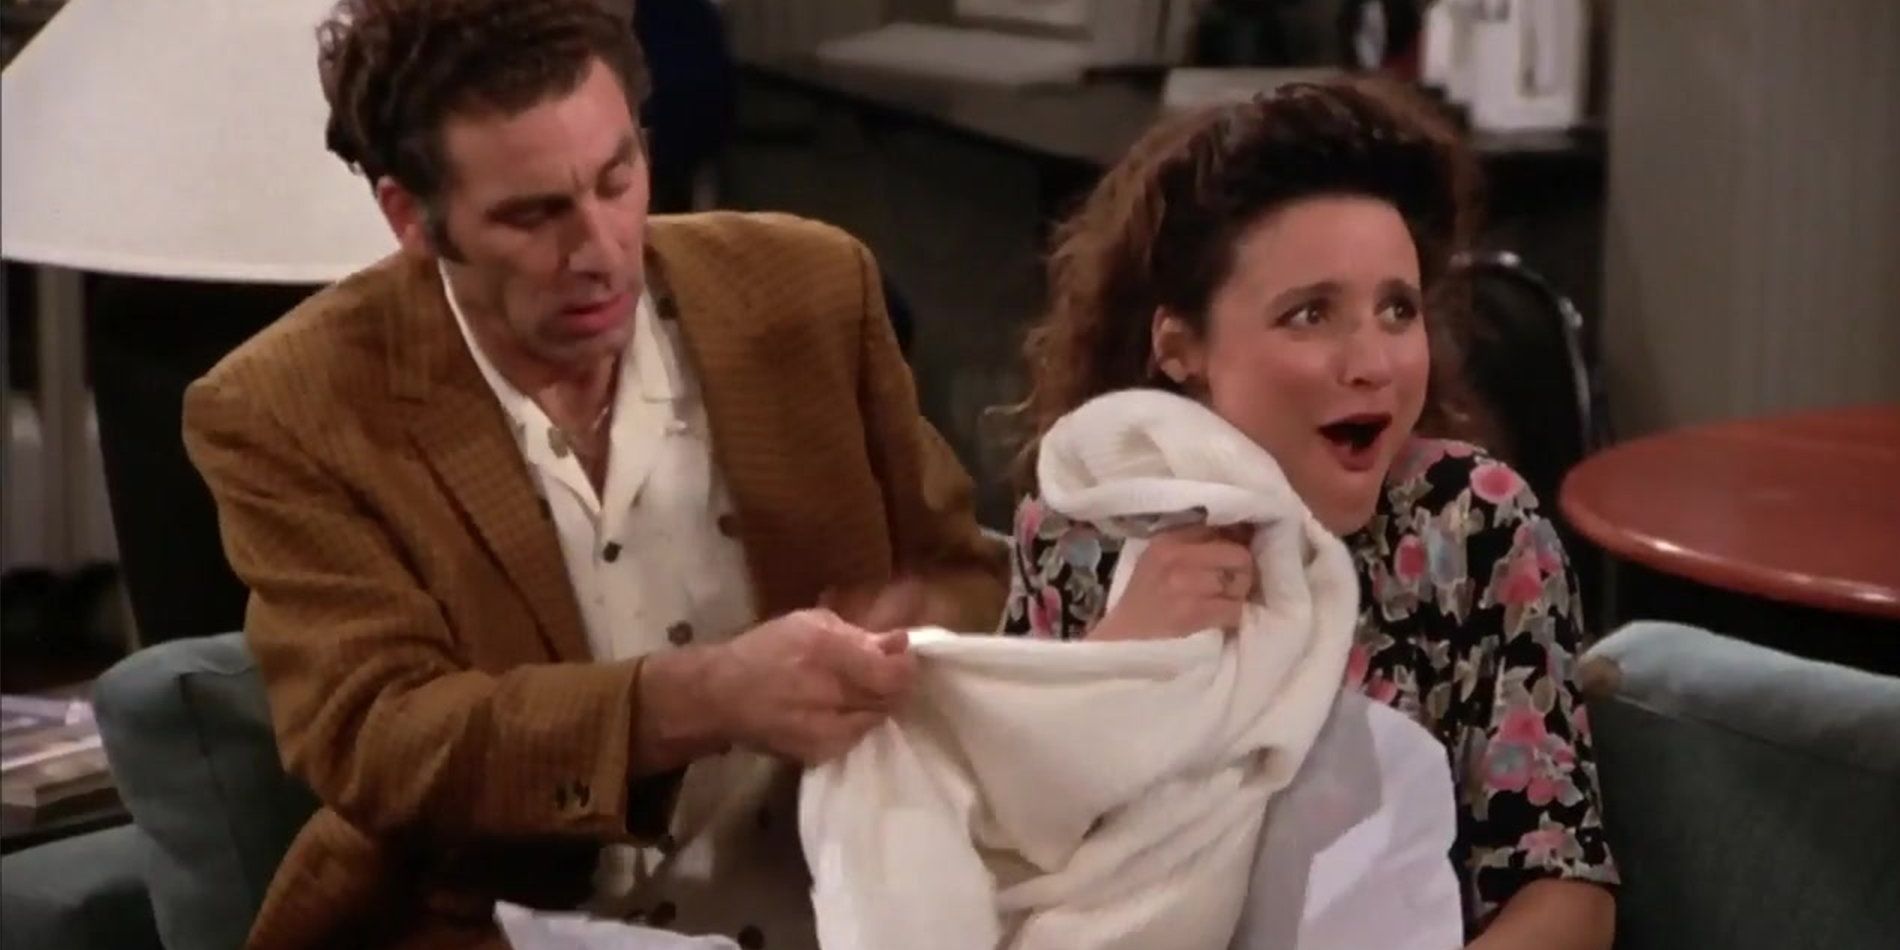 Elaine excited over the cashmere sweater in Seinfeld - The Red Dot